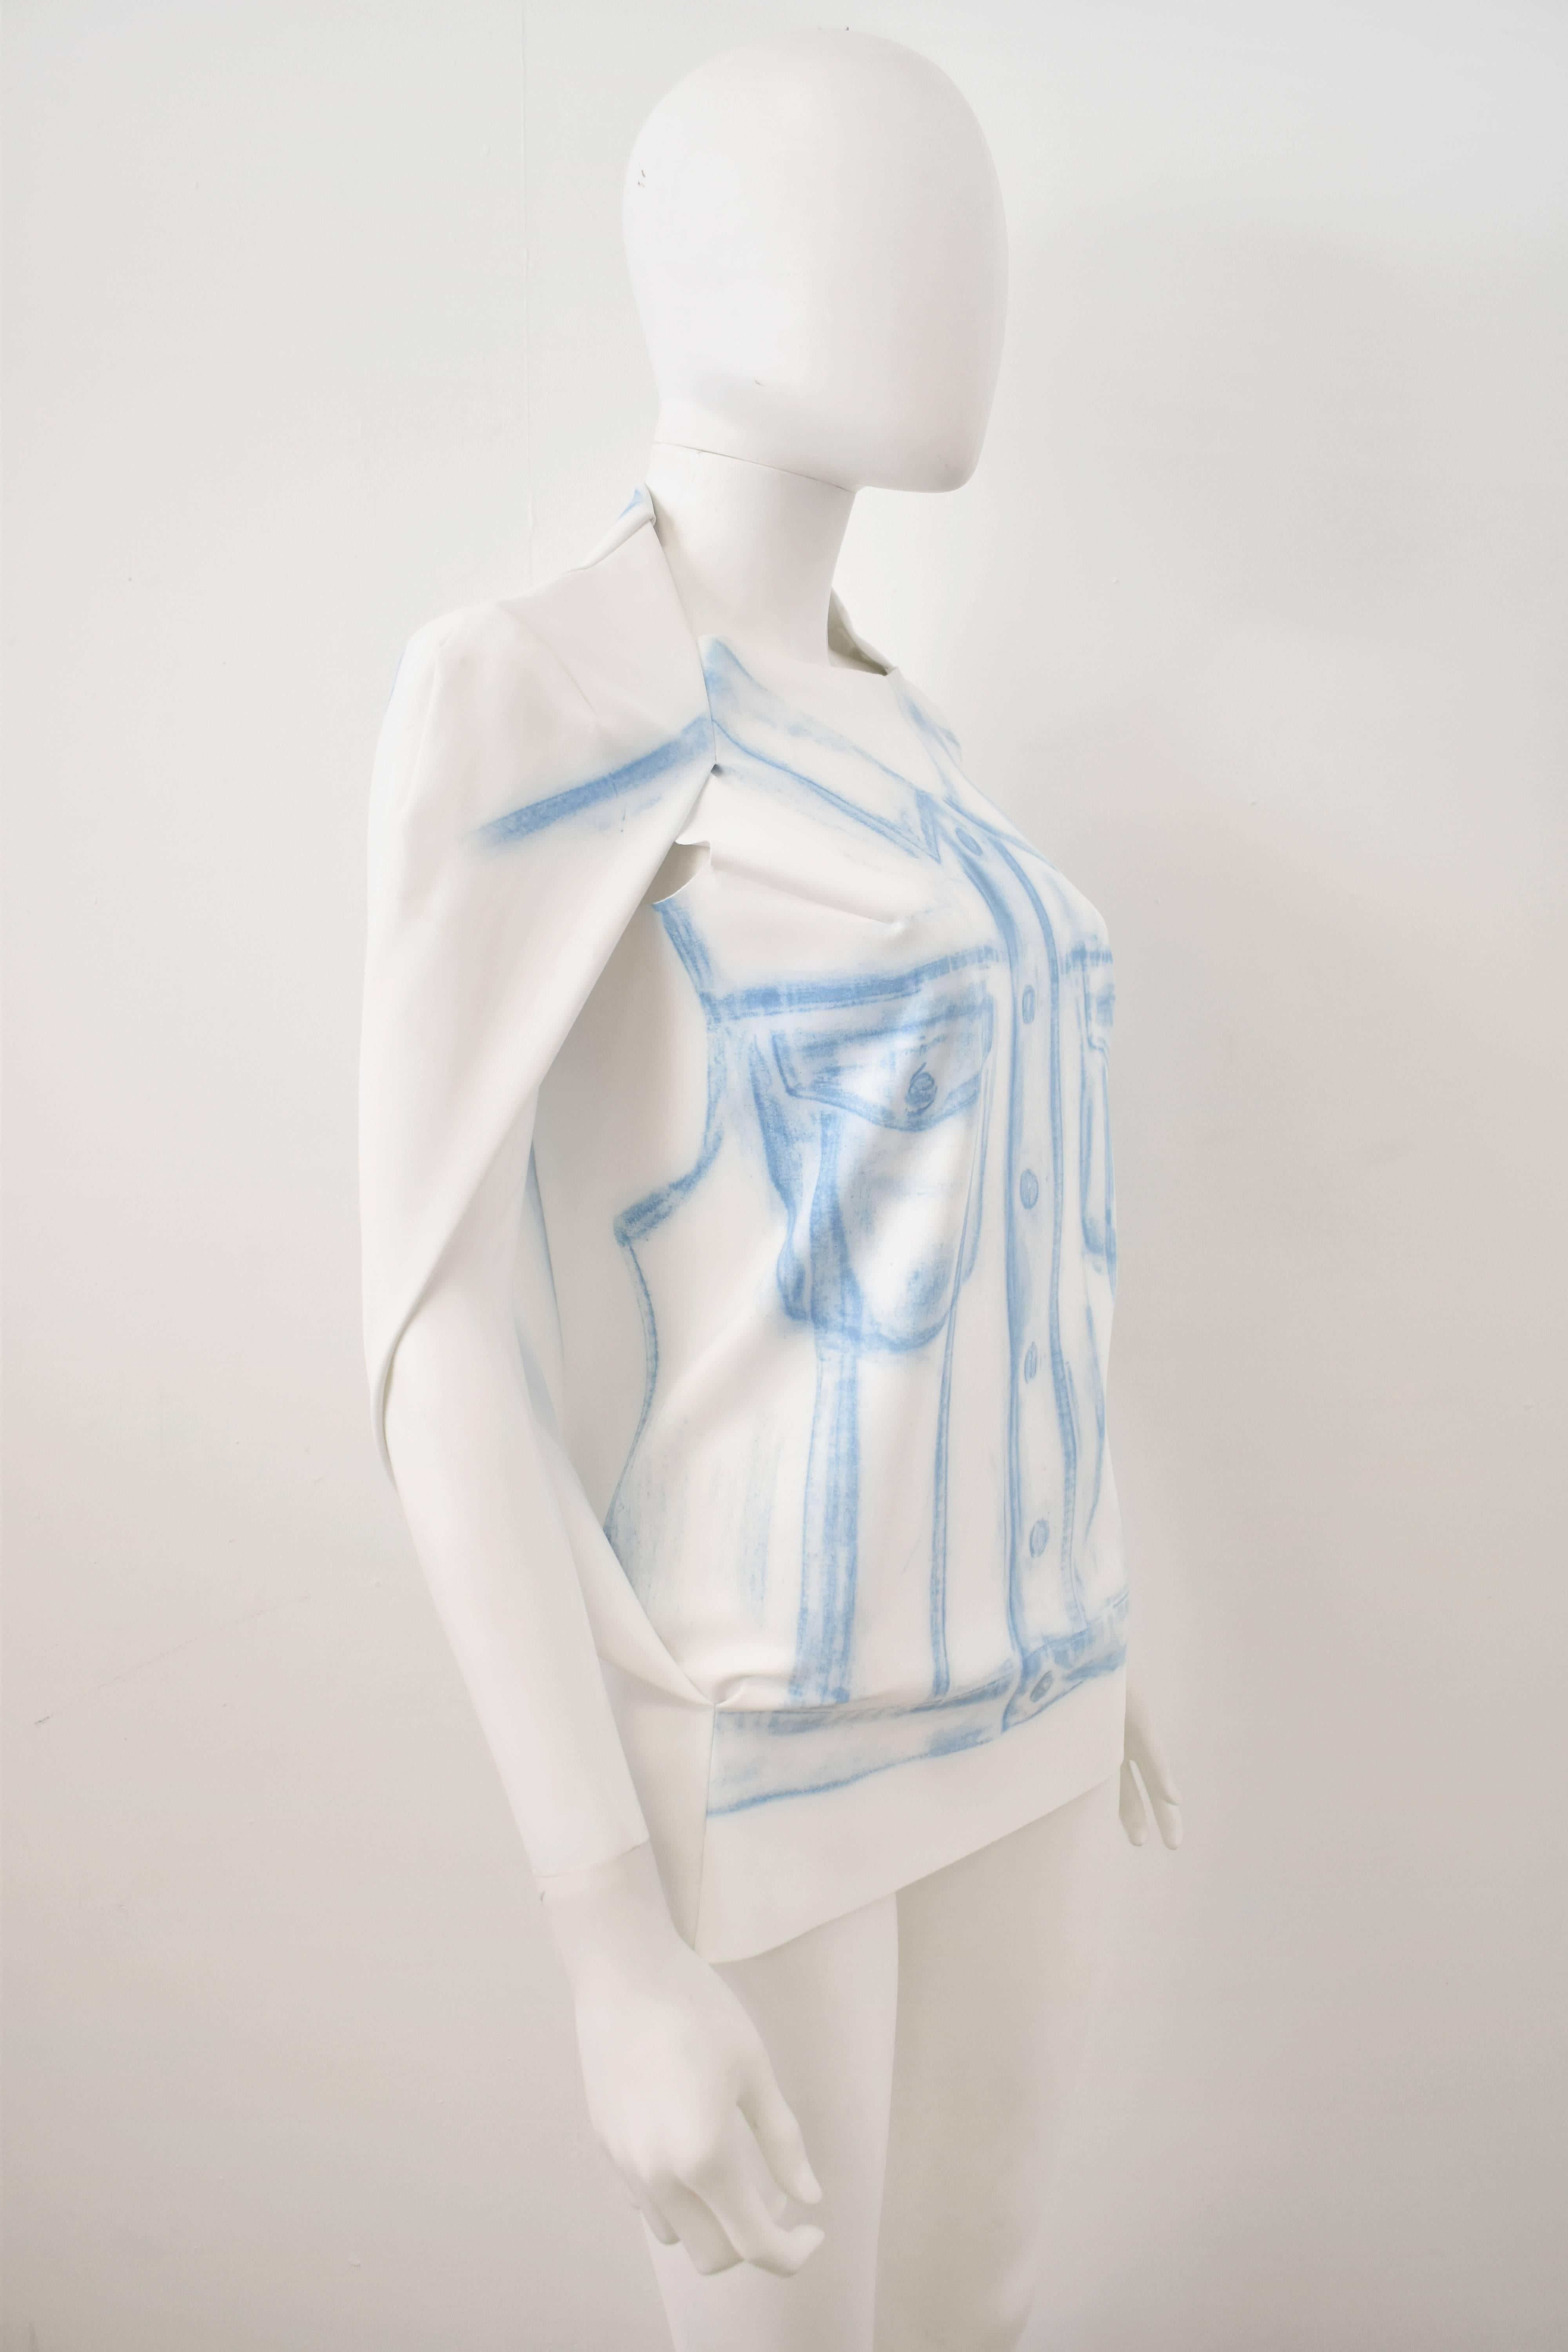 A white cape top from the mainline ‘01’ collection of Maison Martin Margiela. The top has a vest body with an attached capelet that covers the shoulders and back with the arms emerging from the sides. The top is made of a white polyamide and